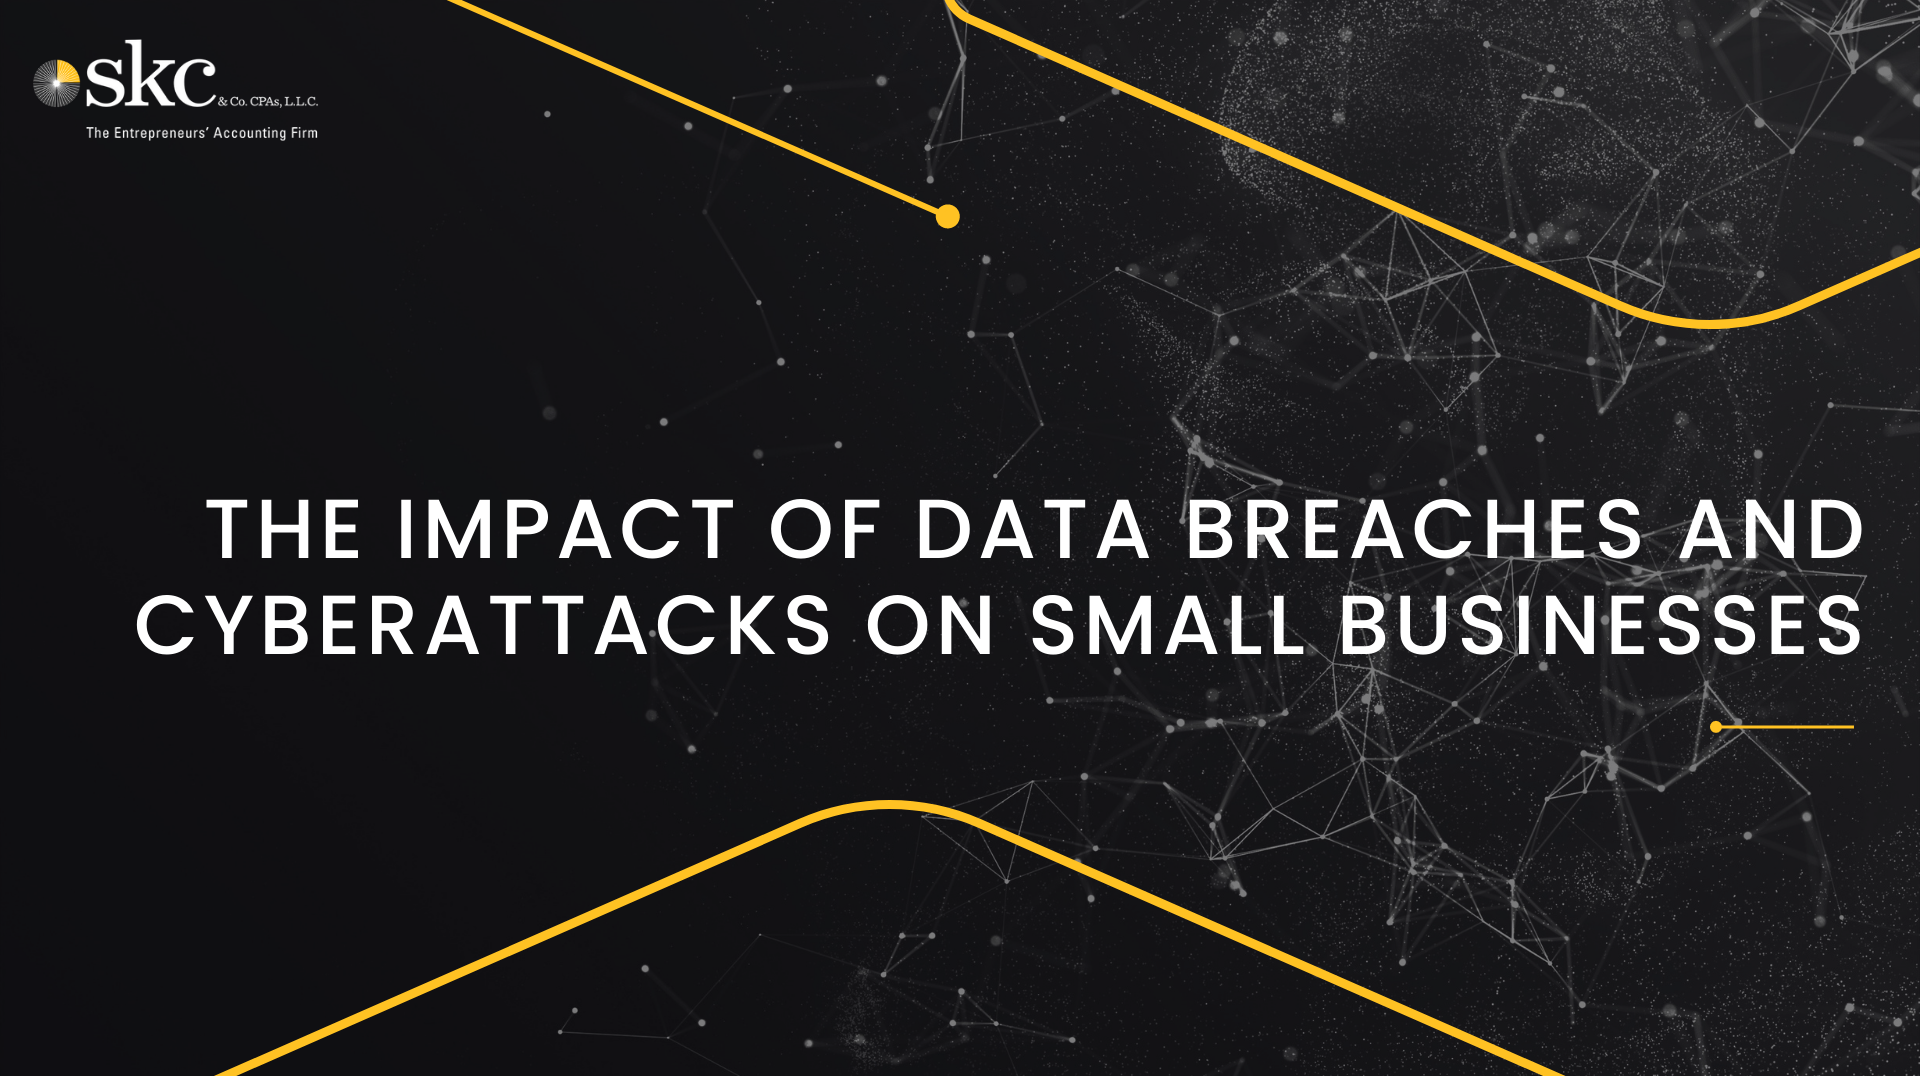 The Impact of Data Breaches and Cyberattacks on Small Businesses